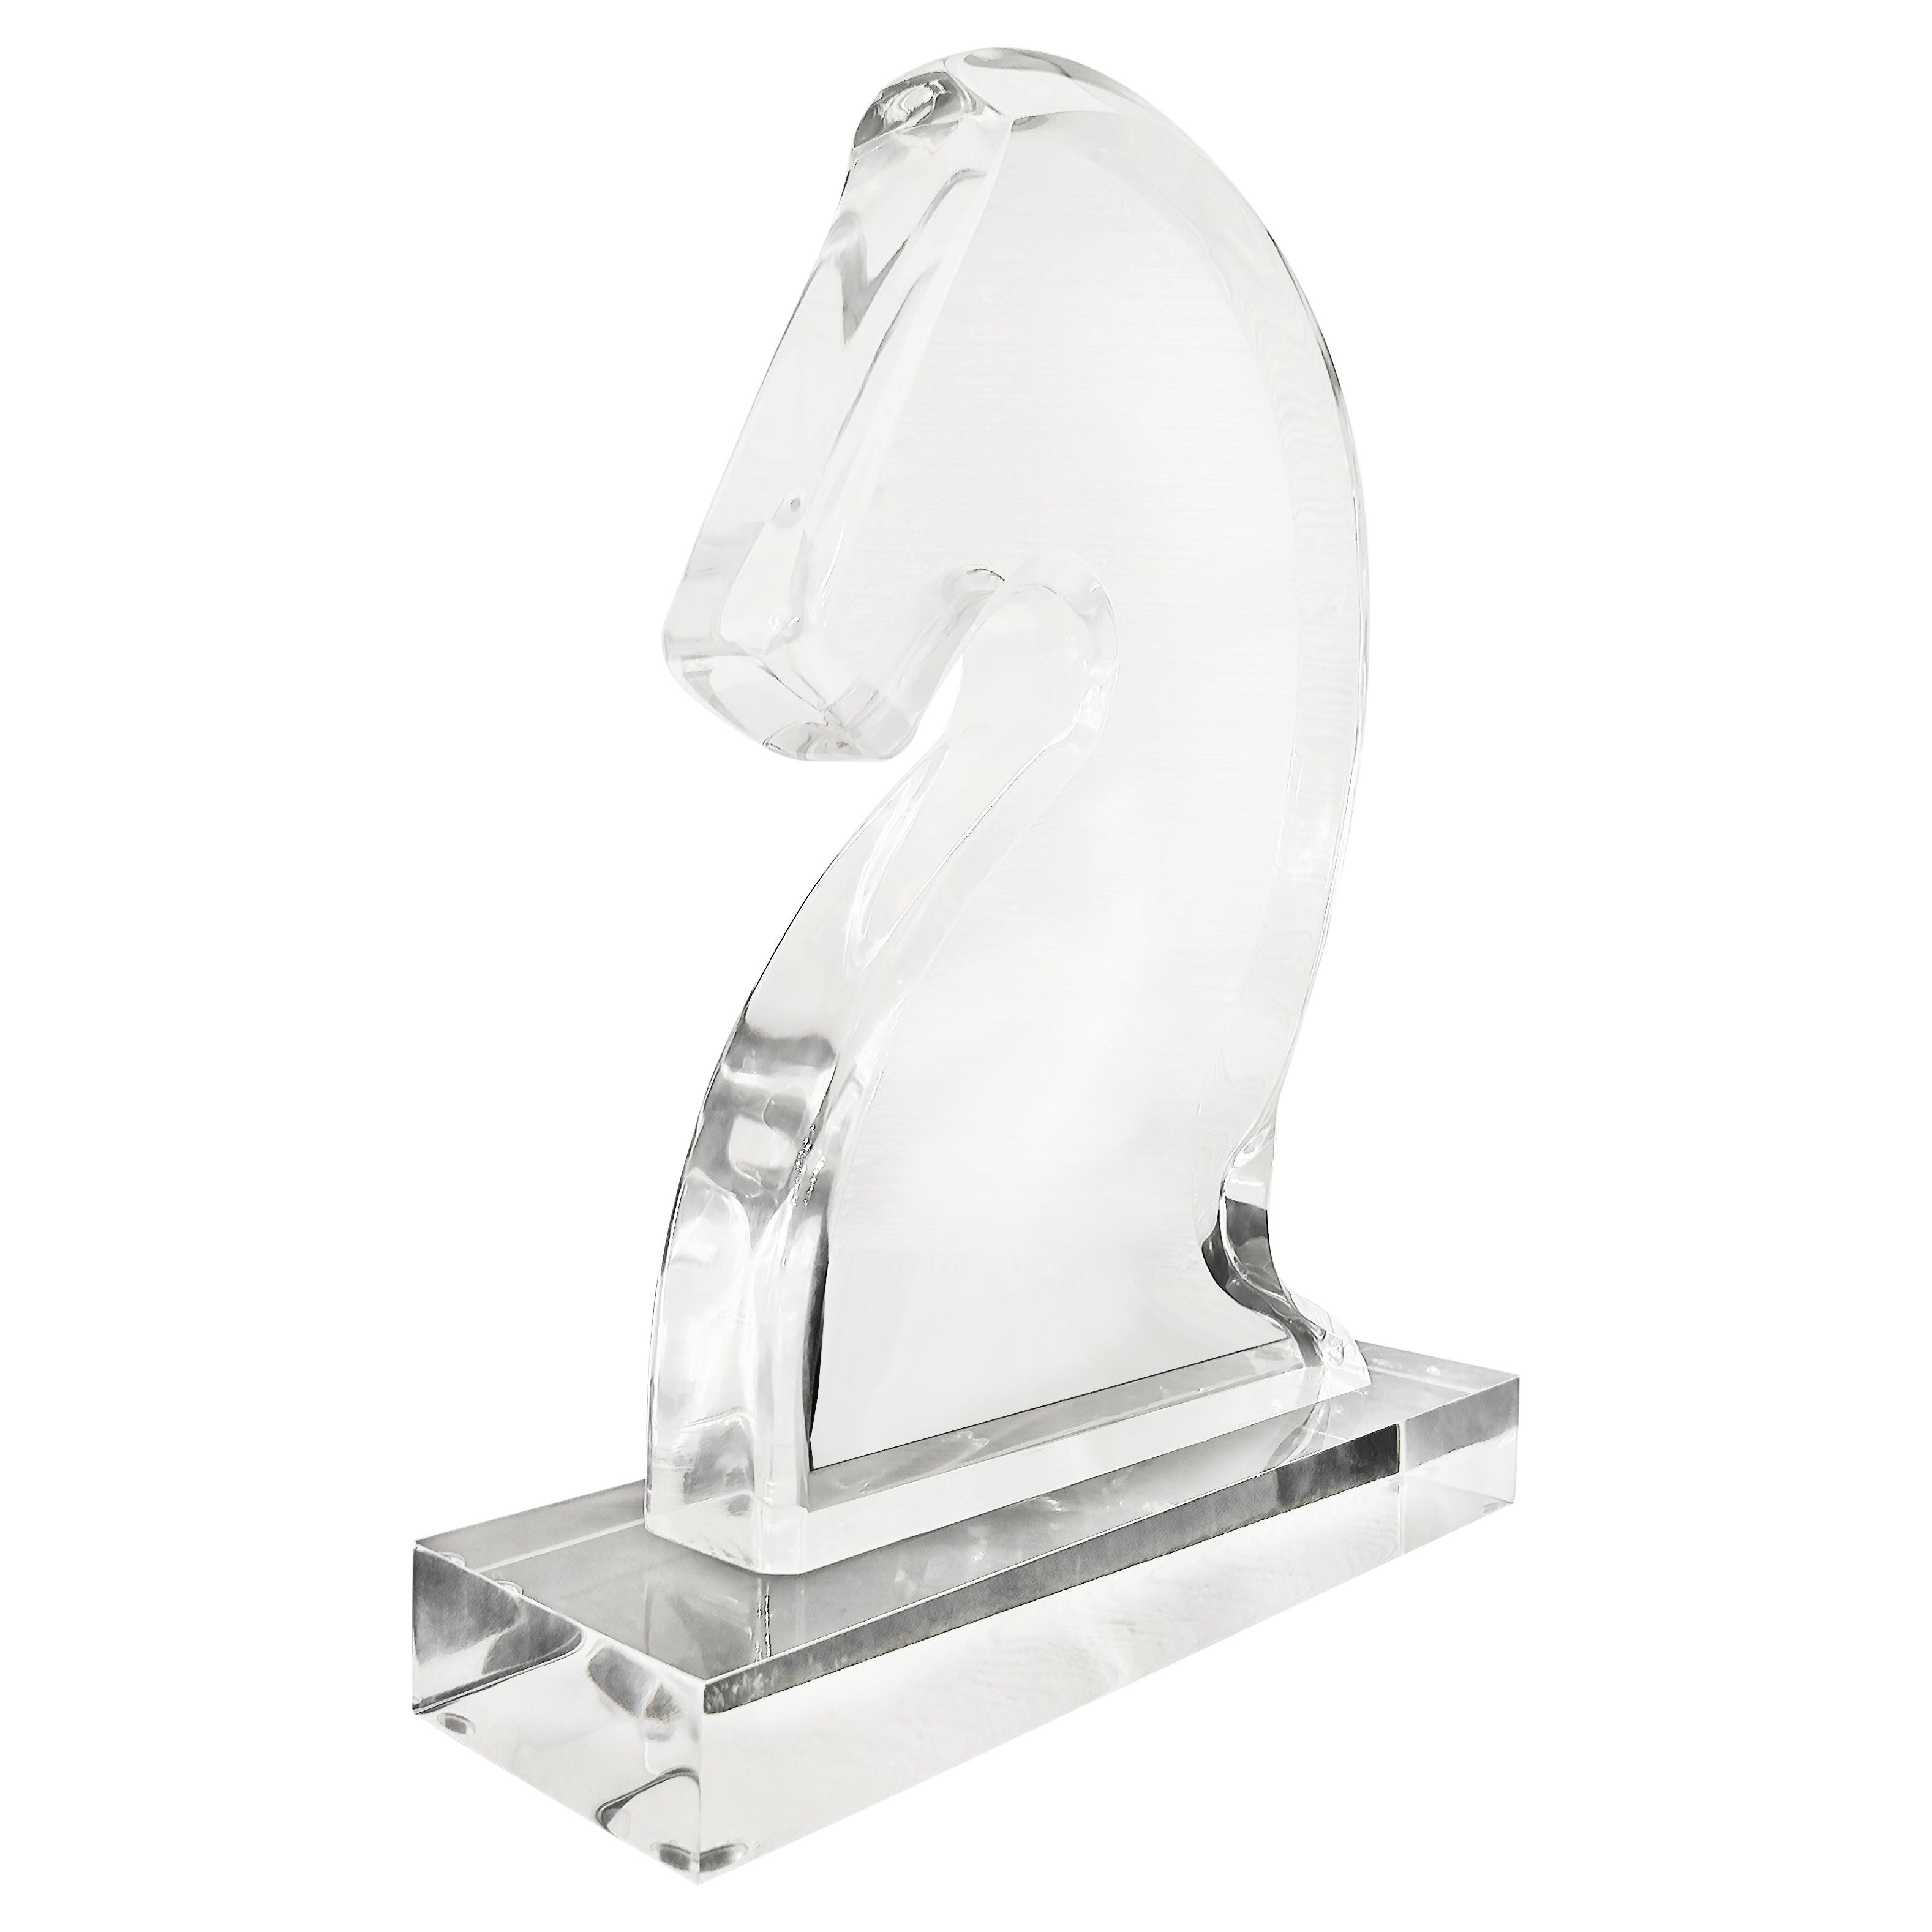 Trojan Horse Head or Knight Chess Piece Lucite Sculpture on a Base For Sale